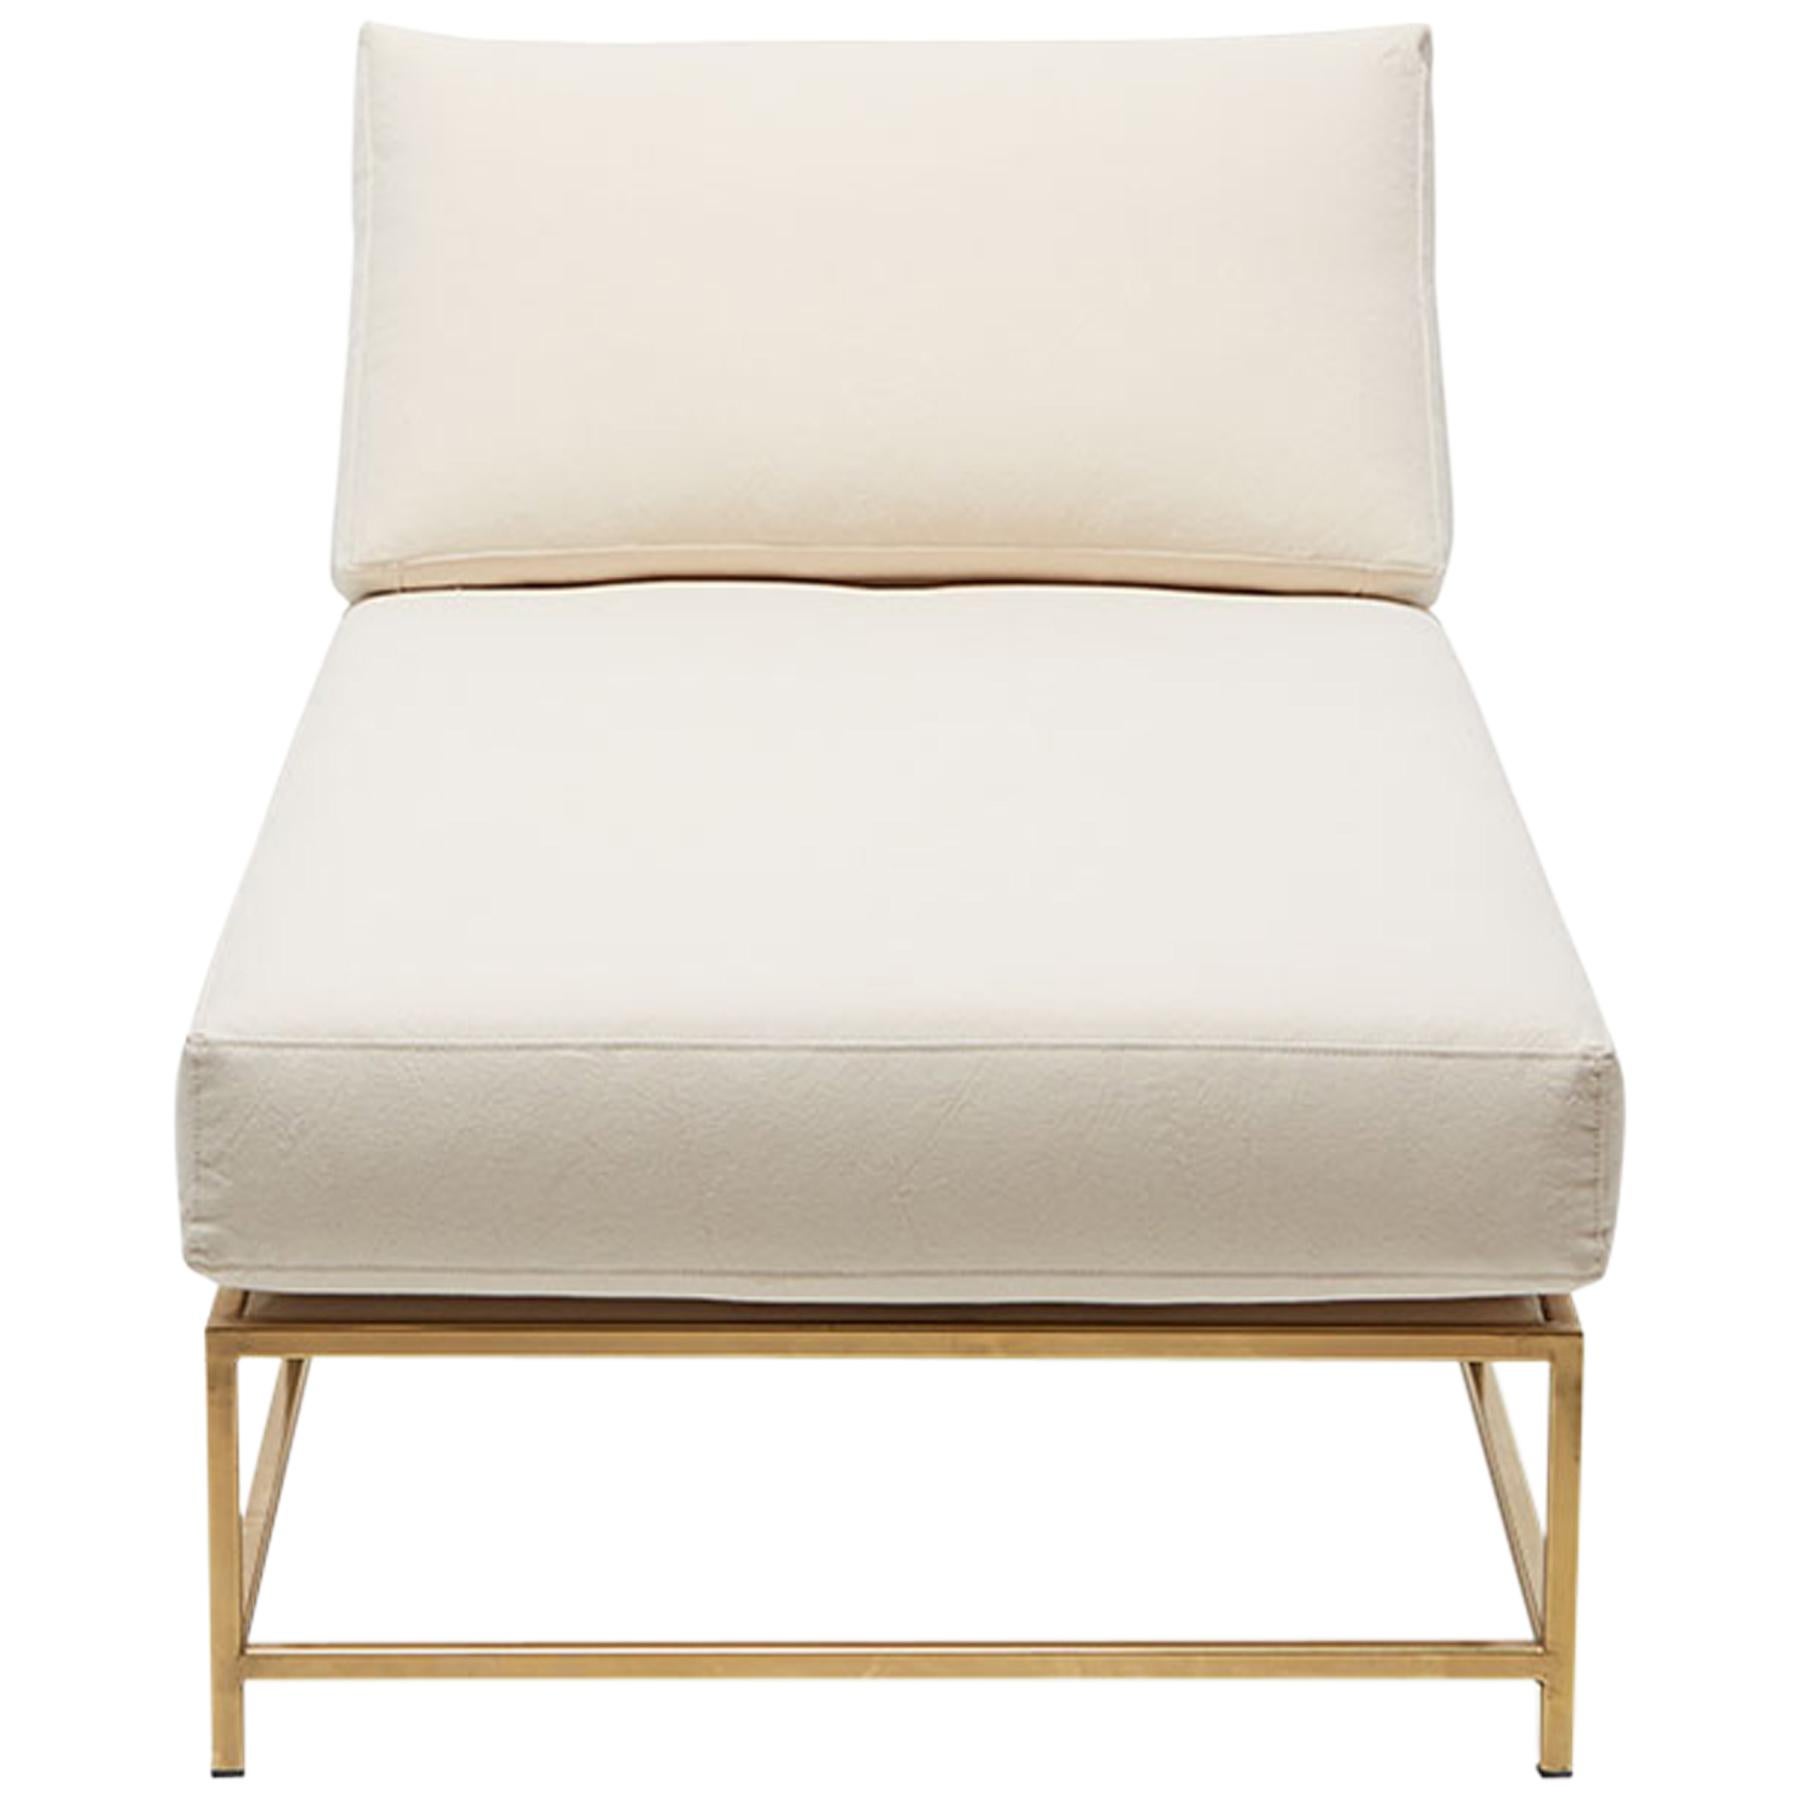 Natural Canvas & Tarnished Brass Chaise Lounge